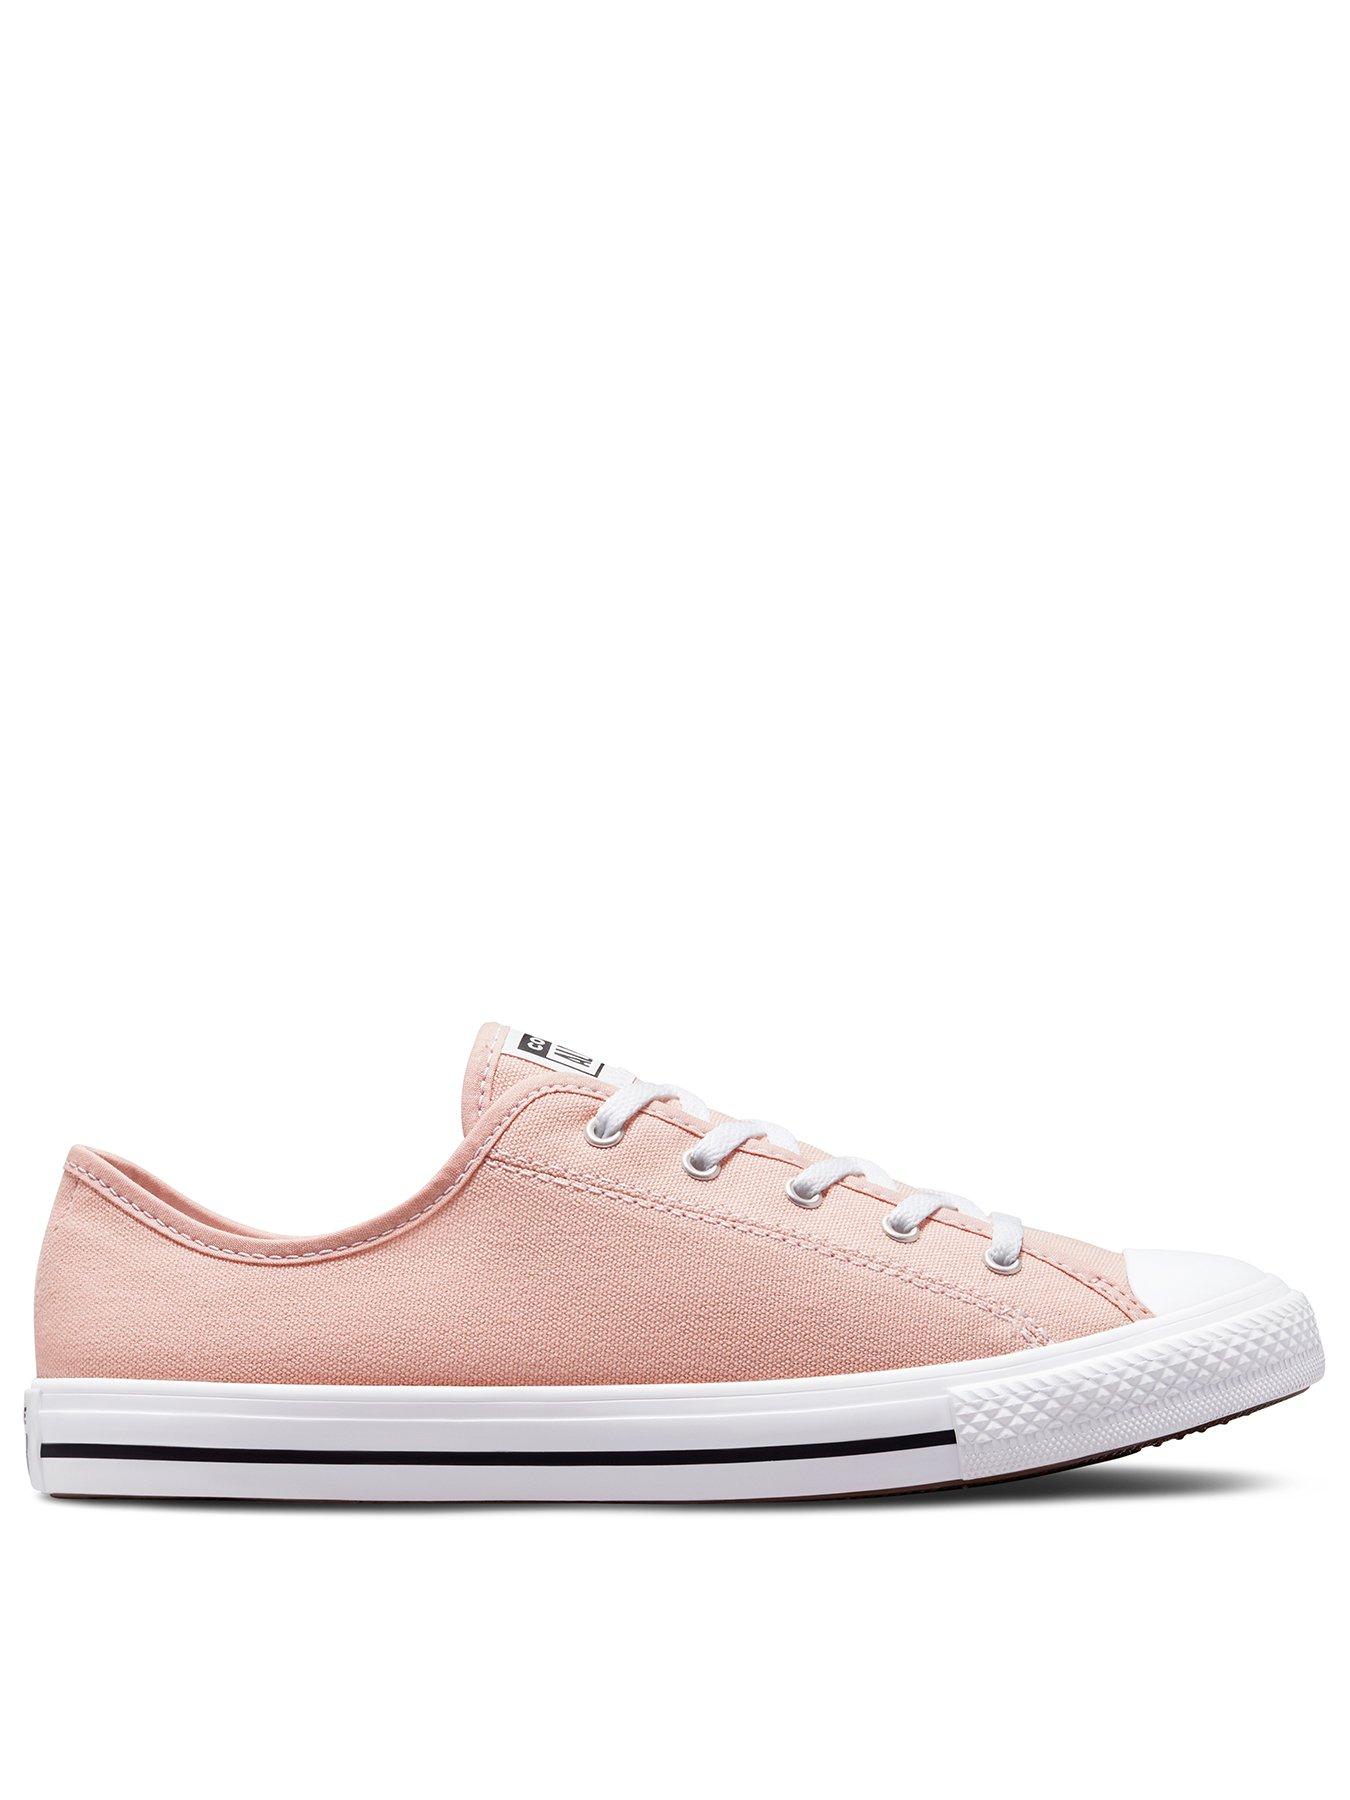 Trainers Chuck Taylor All Star Dainty Canvas Plimsolls - Pink